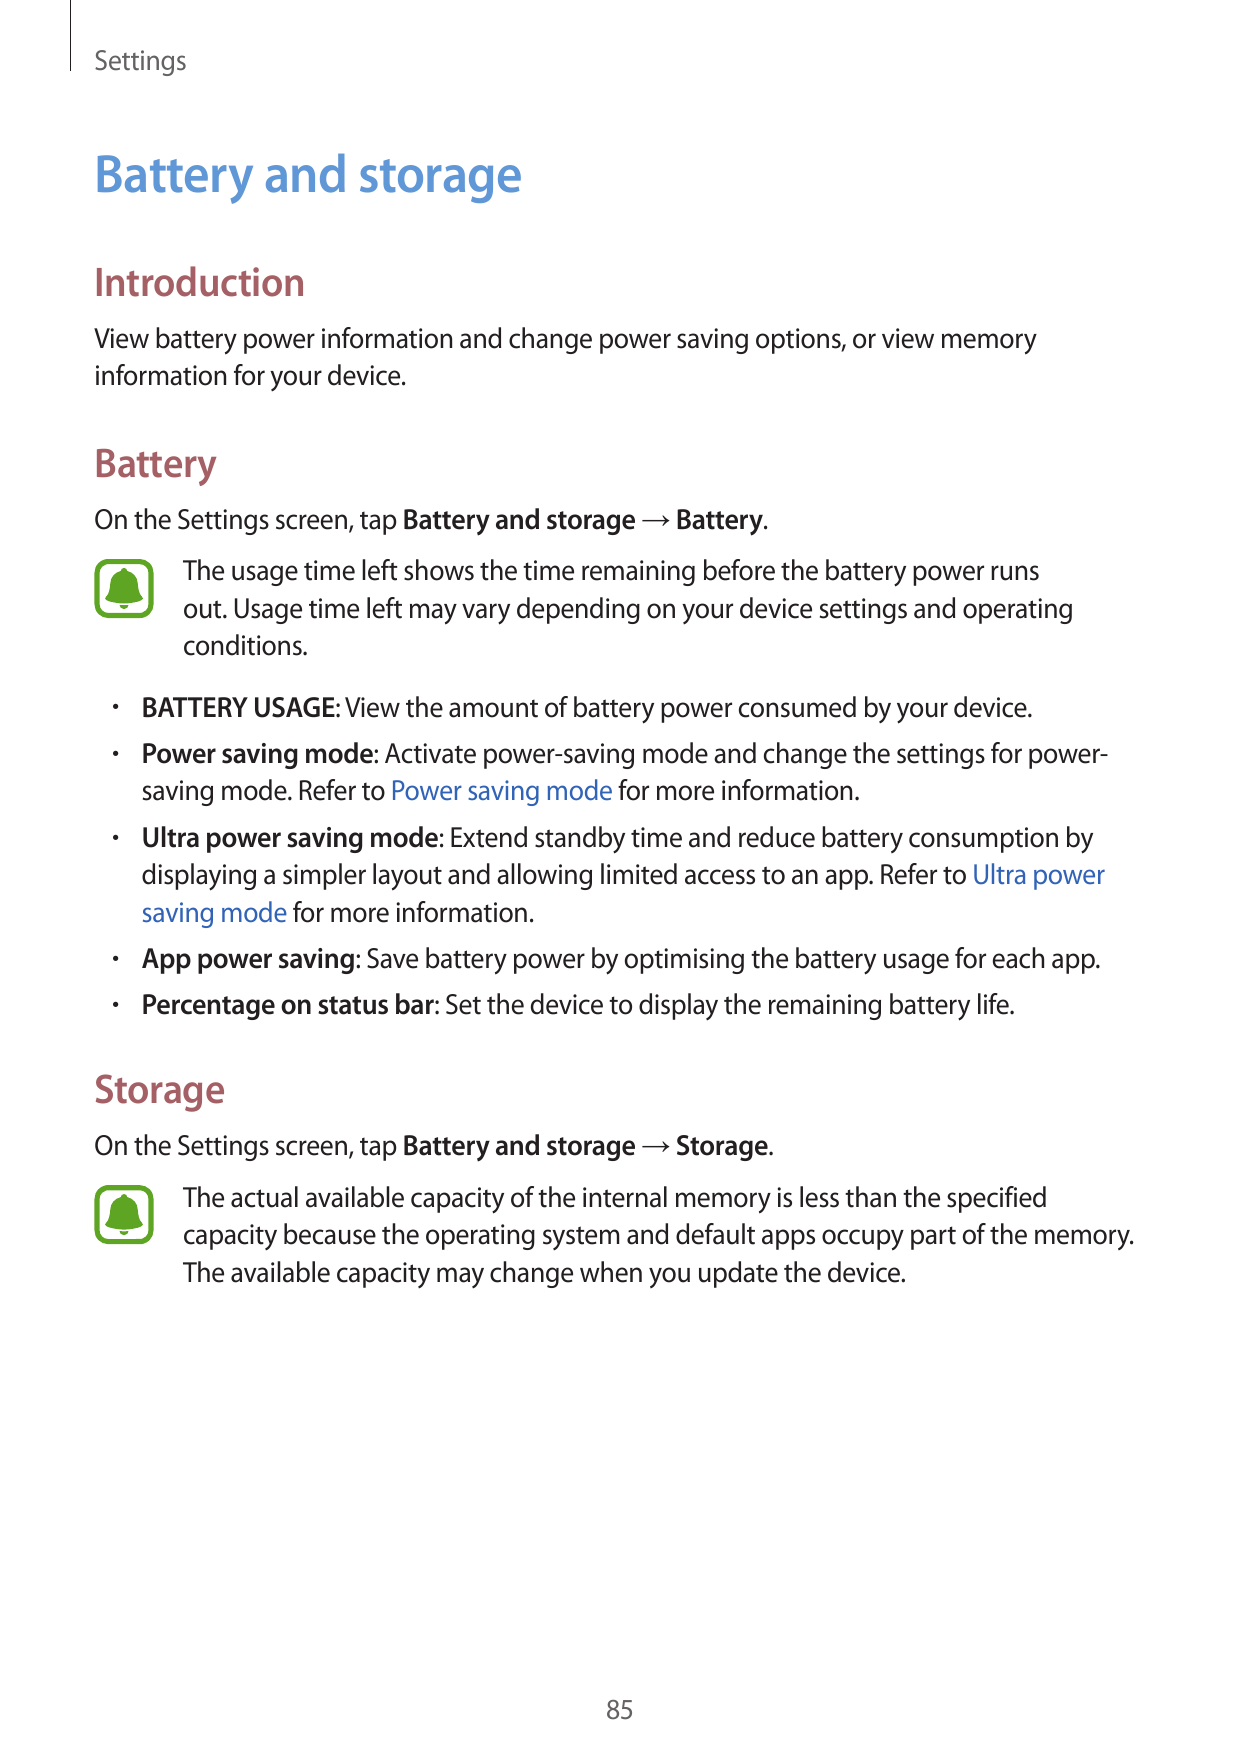 SettingsBattery and storageIntroductionView battery power information and change power saving options, or view memoryinformation